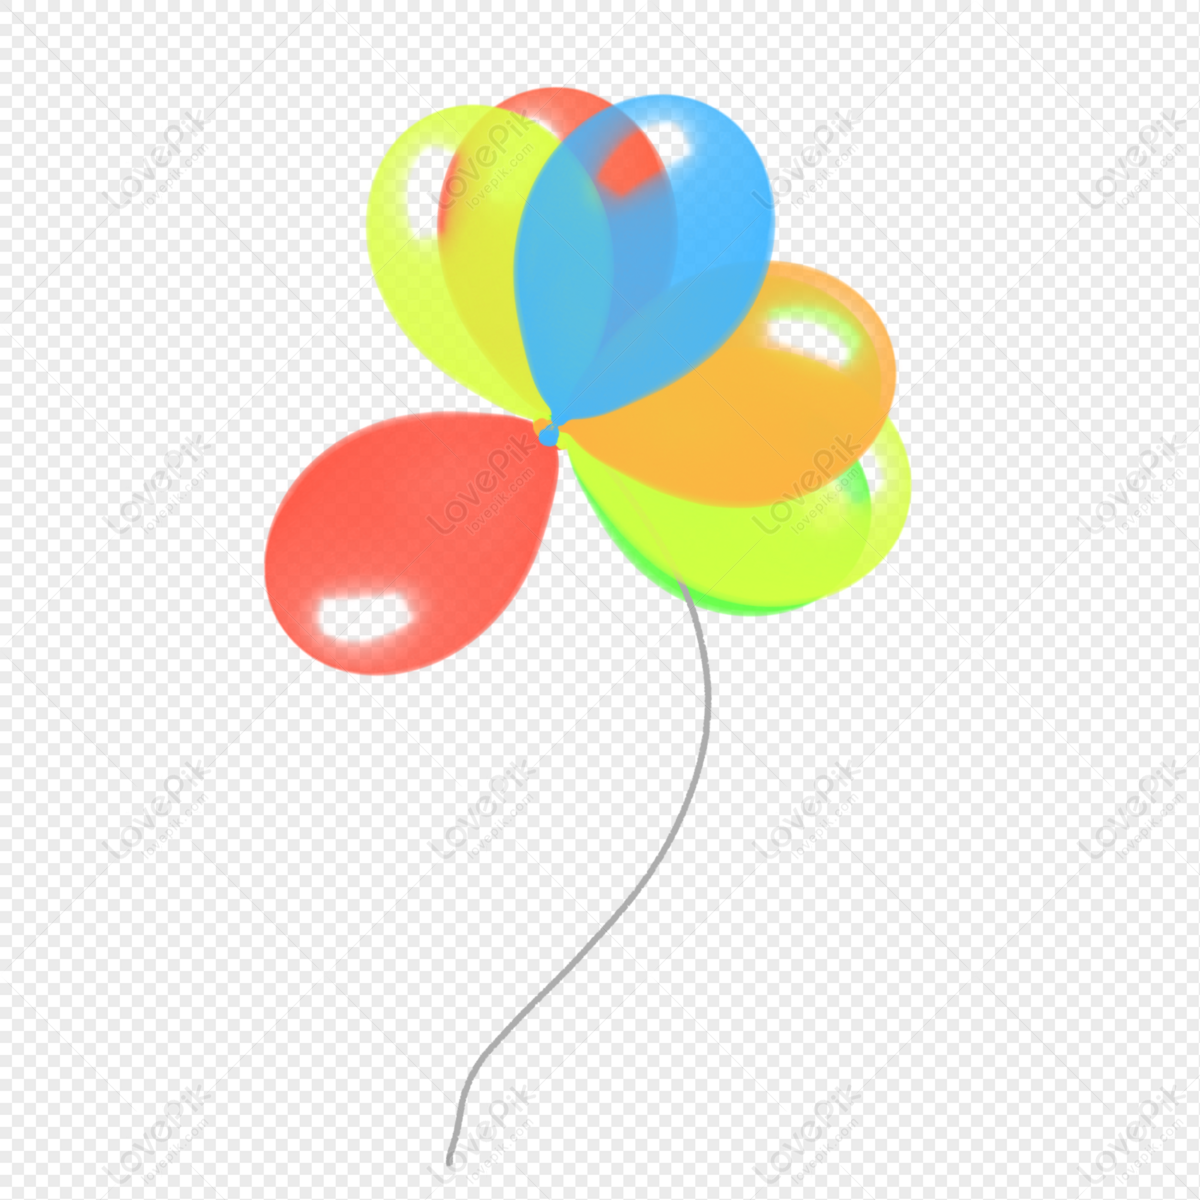 Balloon Strings PNG Images With Transparent Background